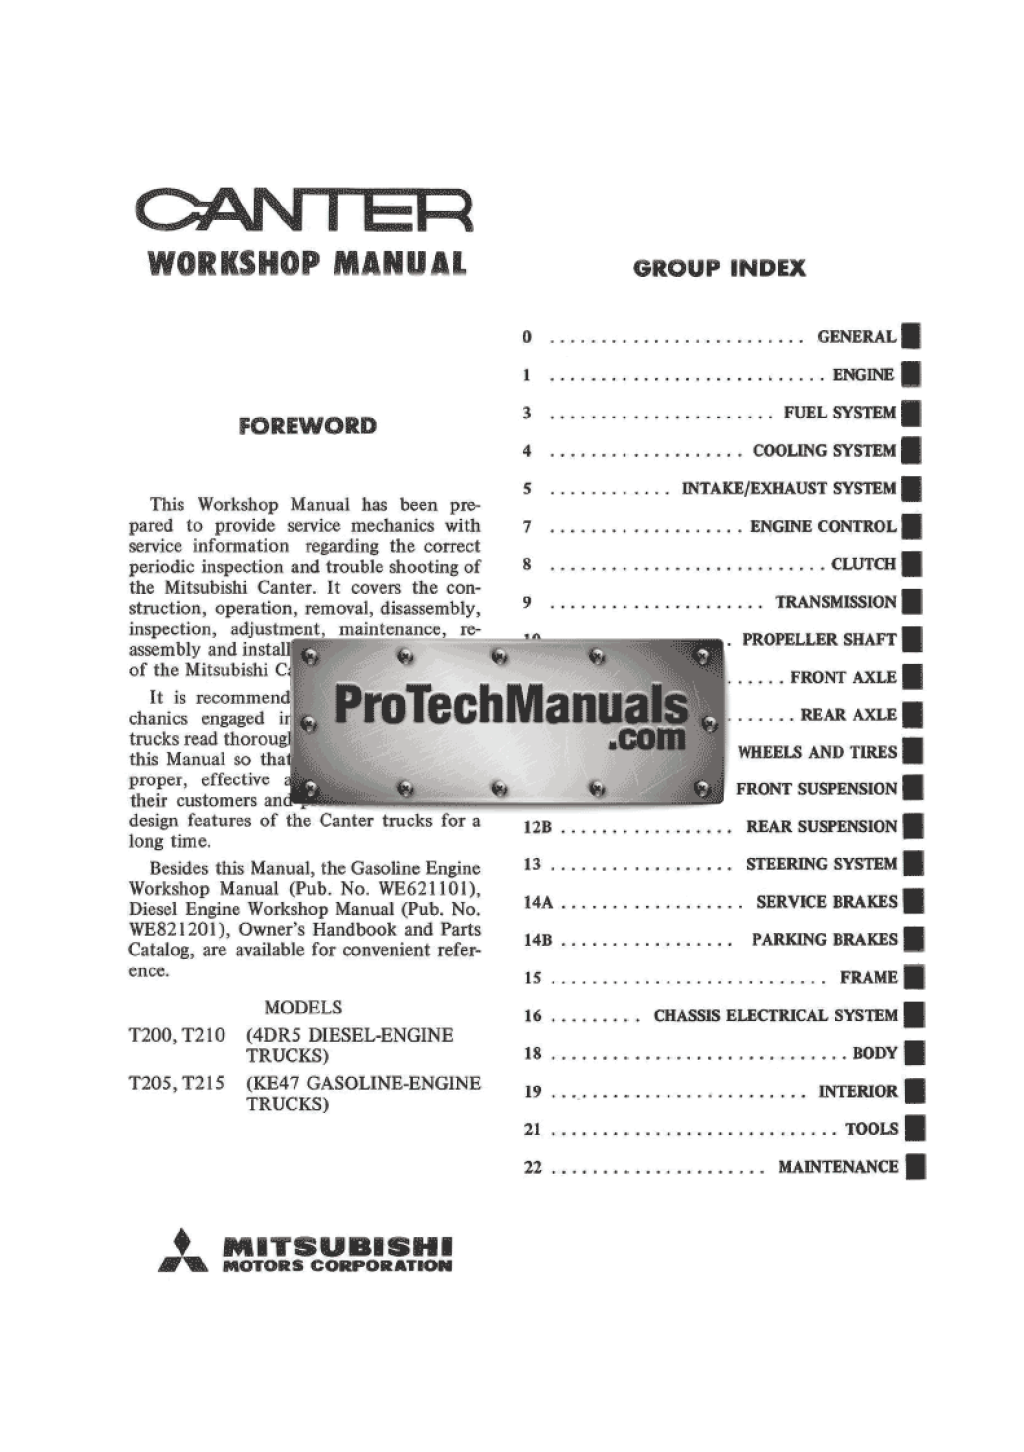 Picture of: FUSO Oceania Manuals – ProTechManuals